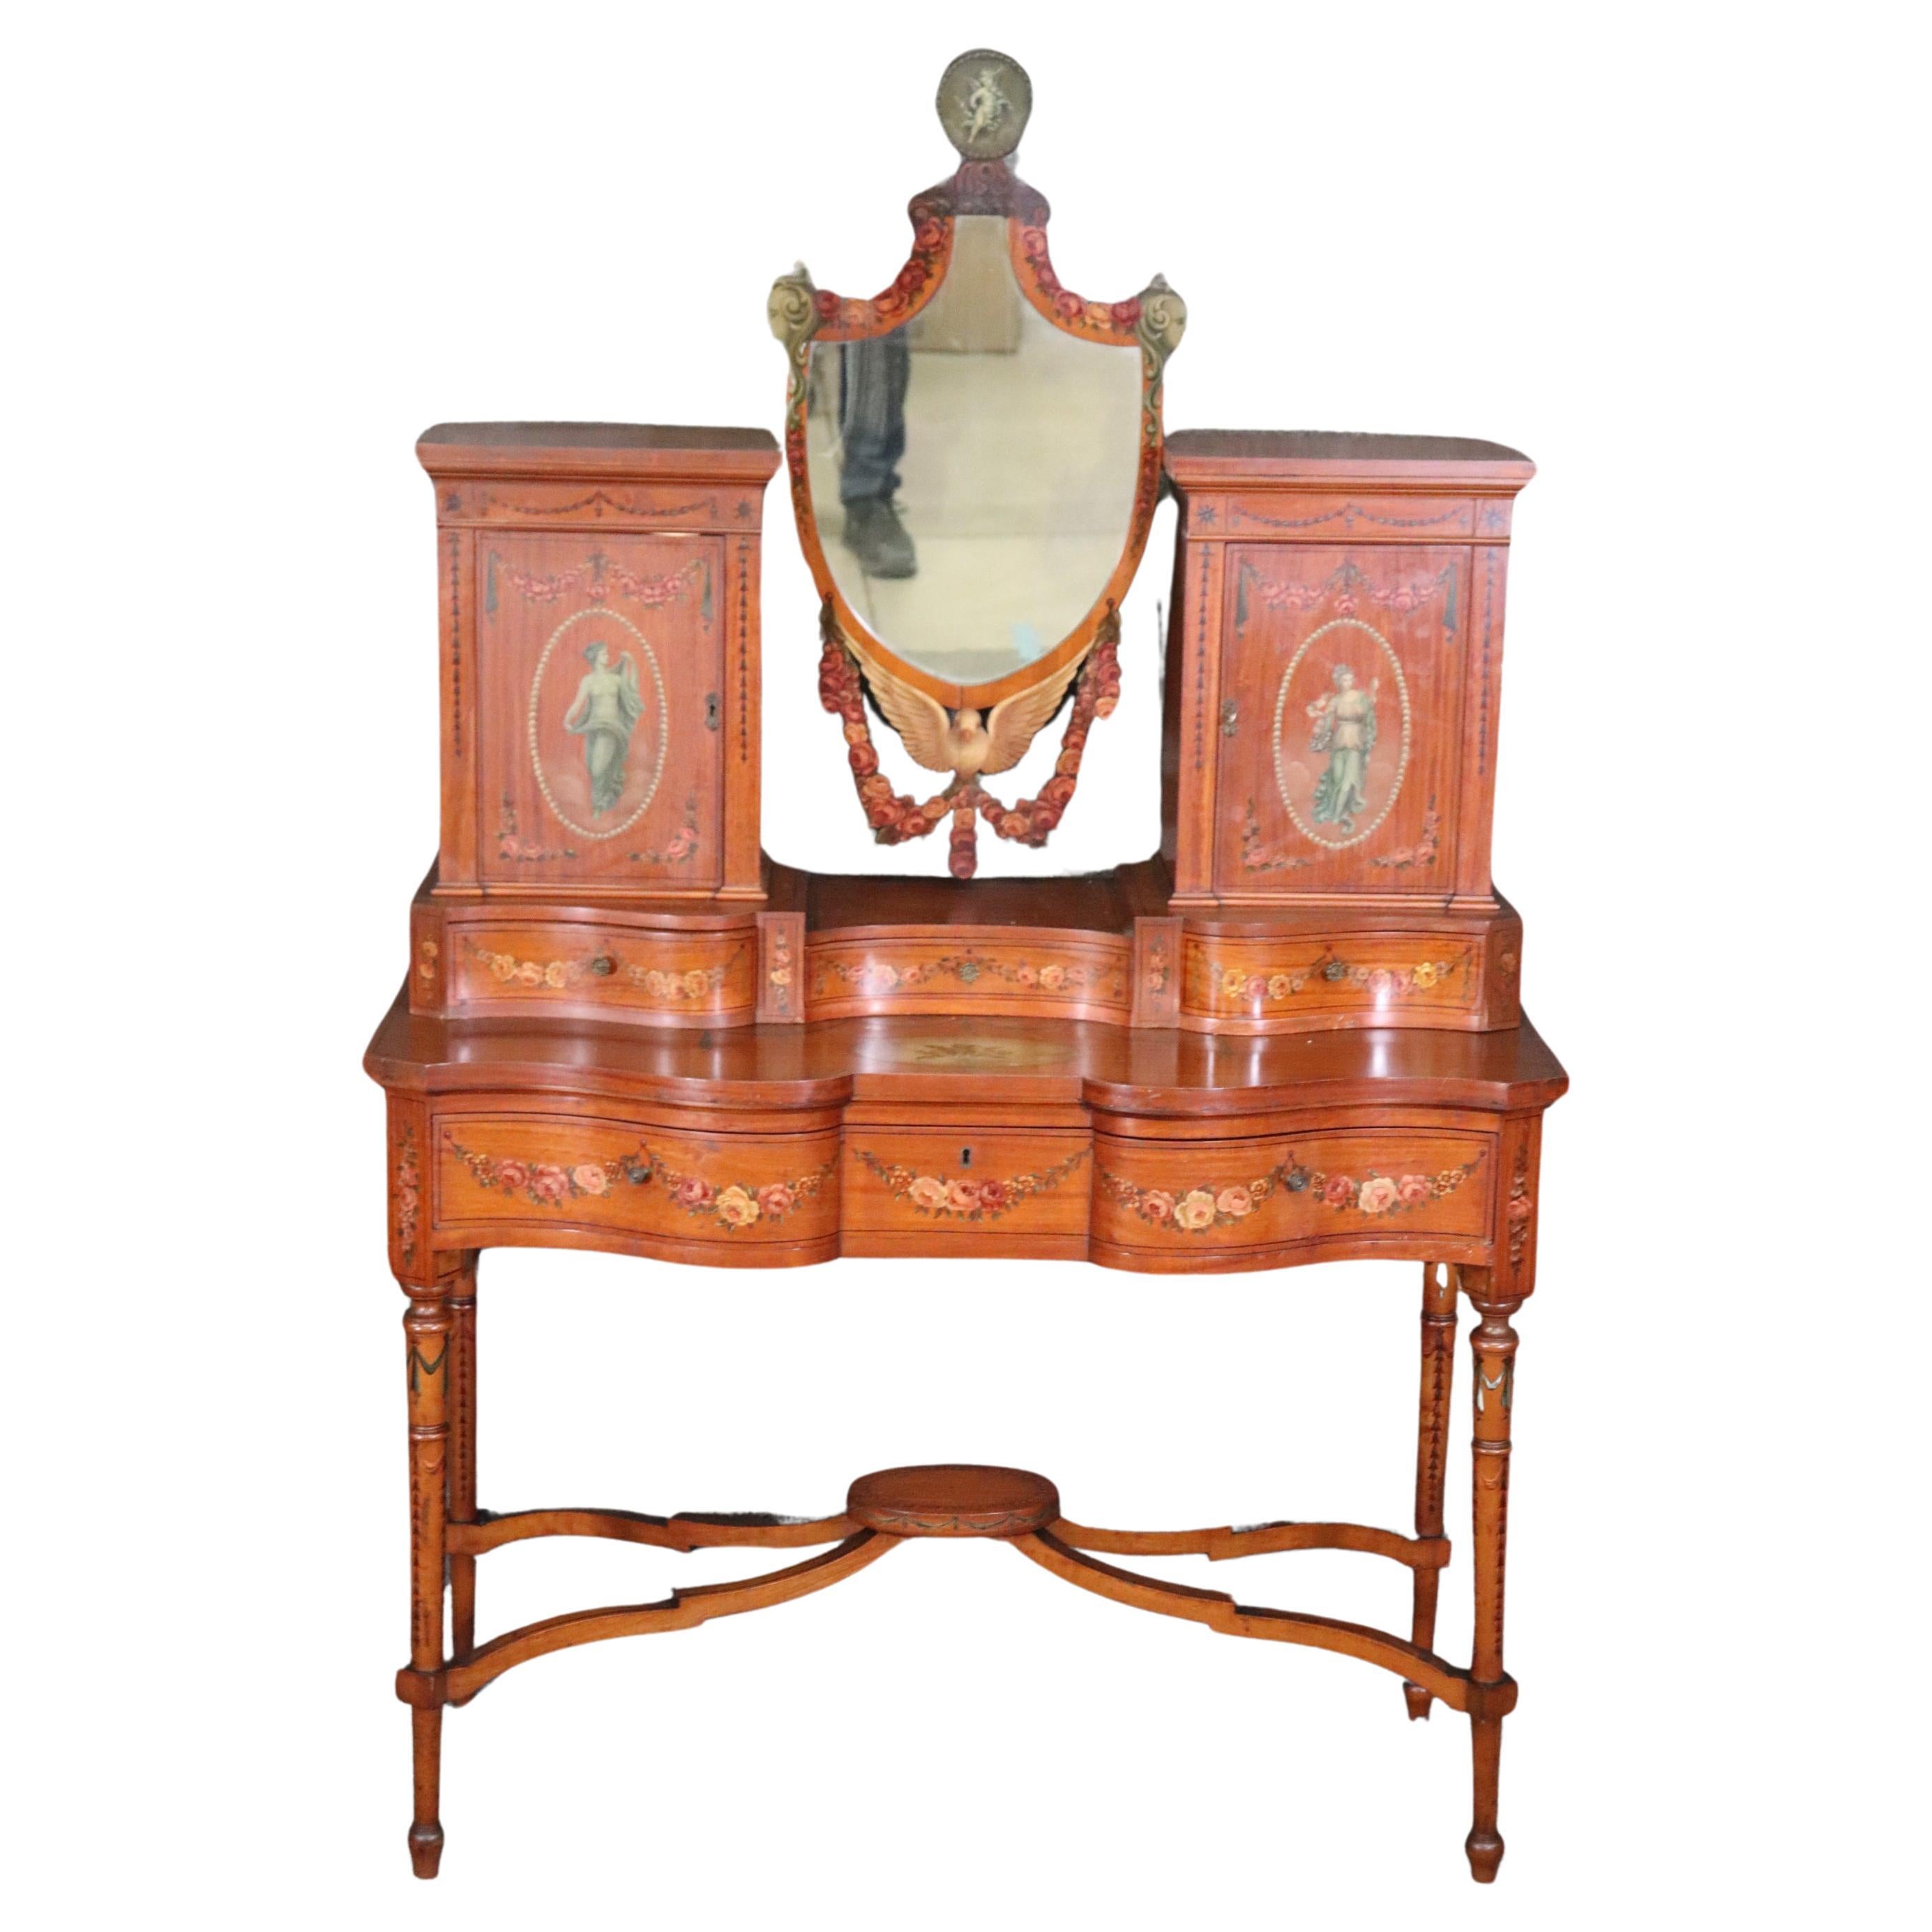 Fine Quality Gillow & Co Satinwood Paint Decorated Ladies Vanity Circa 1890s For Sale